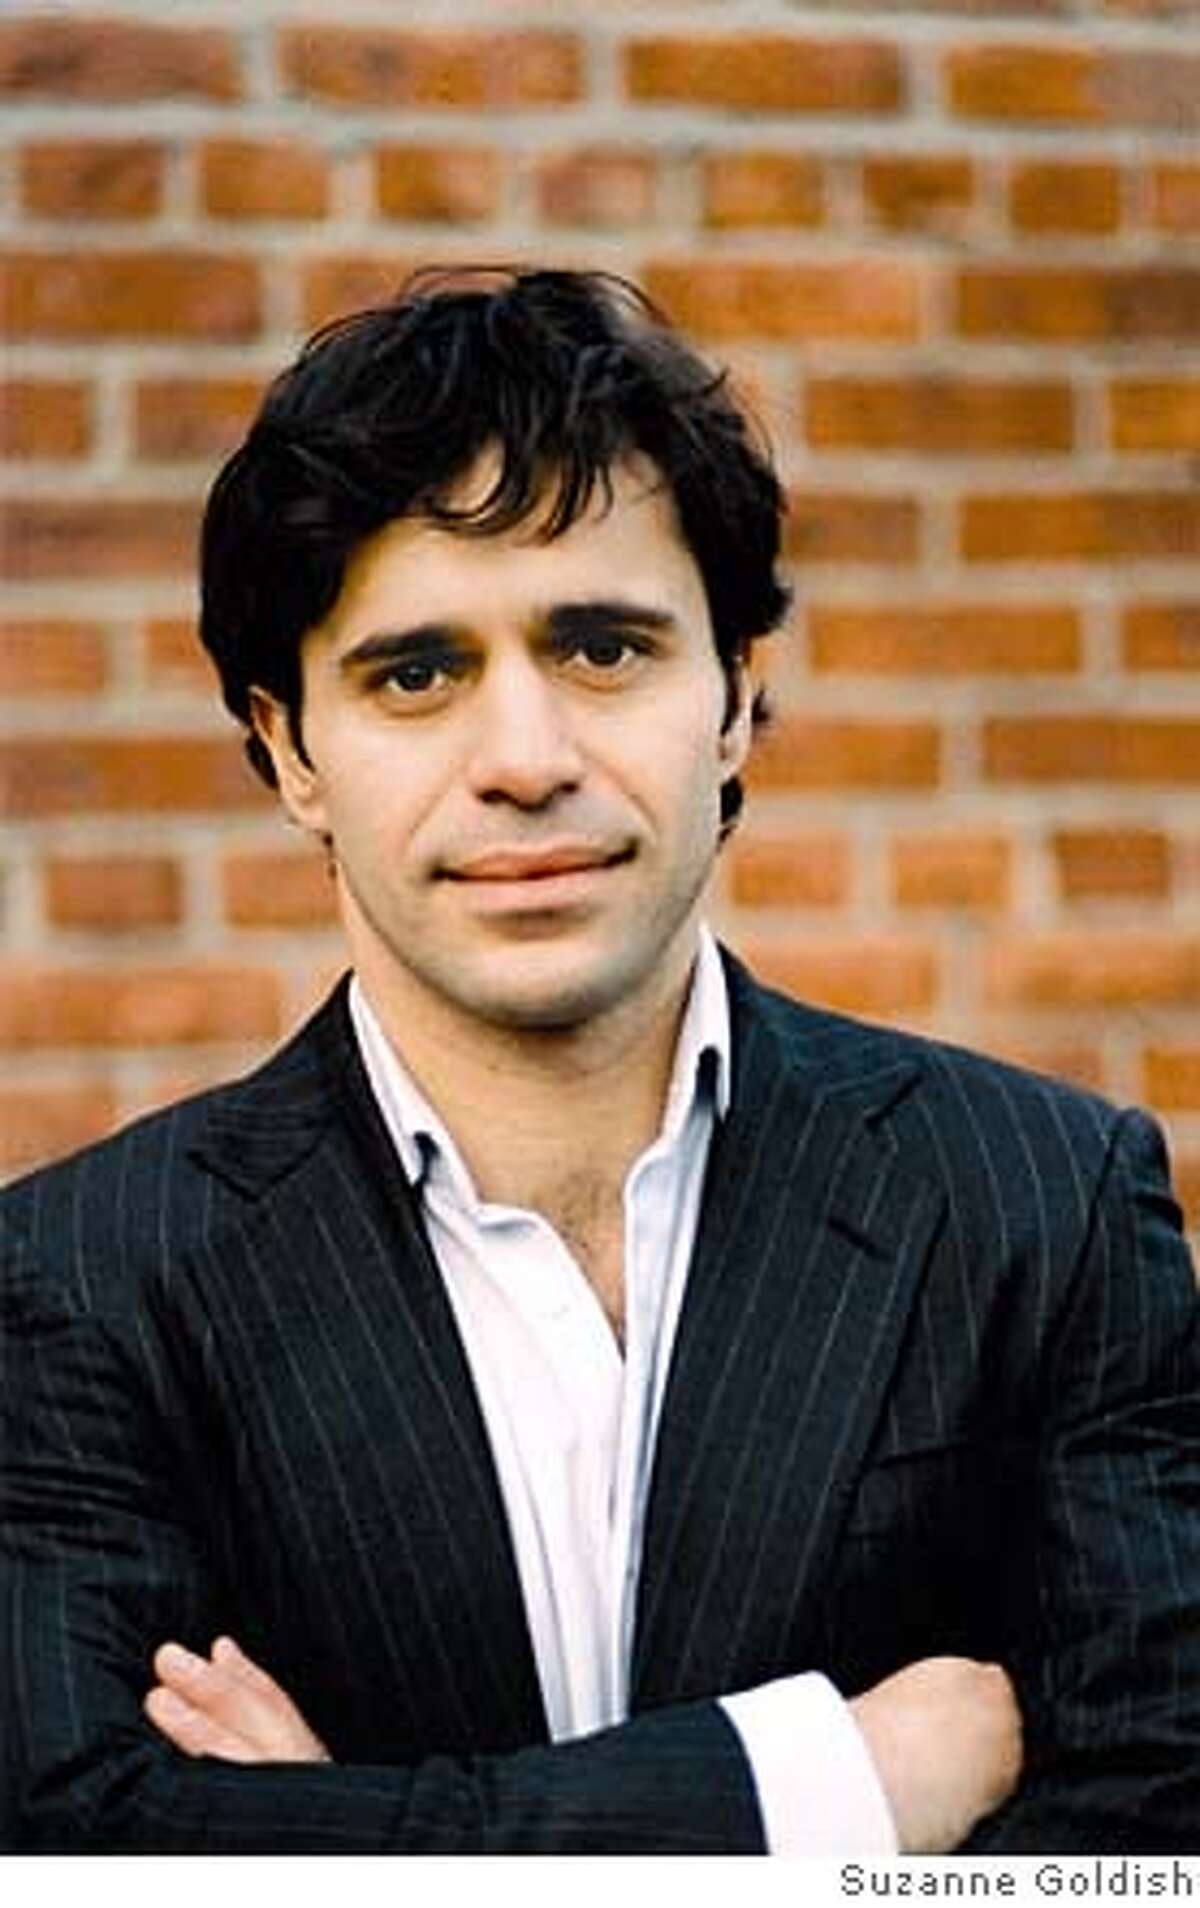 ###Live Caption:Keith Gessen, author of "All the Sad Young Literary Men" / Credit: Suzanne Goldish / FOR USE WITH BOOK REVIEW ONLY###Caption History:Keith Gessen, author of "All the Sad Young Literary Men" / Credit: Suzanne Goldish / FOR USE WITH BOOK REVIEW ONLY###Notes:###Special Instructions: